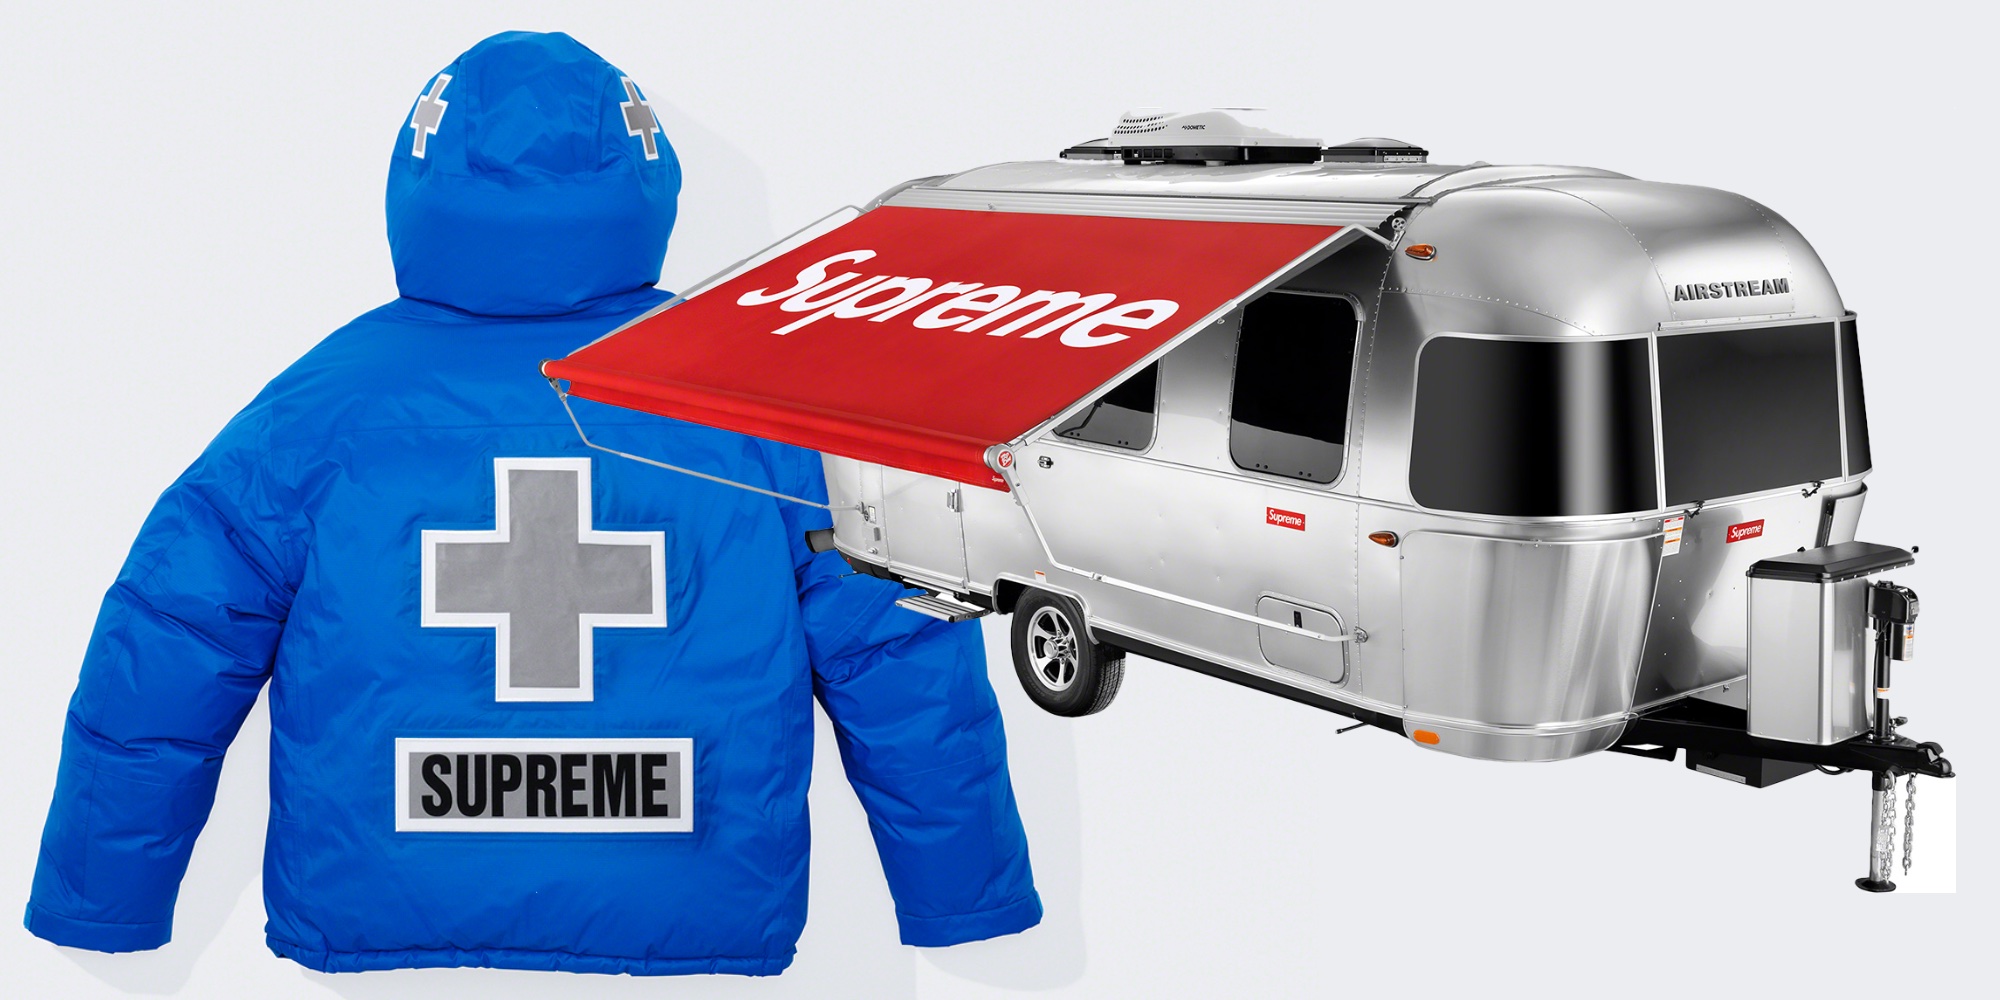 Supreme spring collection arrives with The North Face gear - 9to5Toys